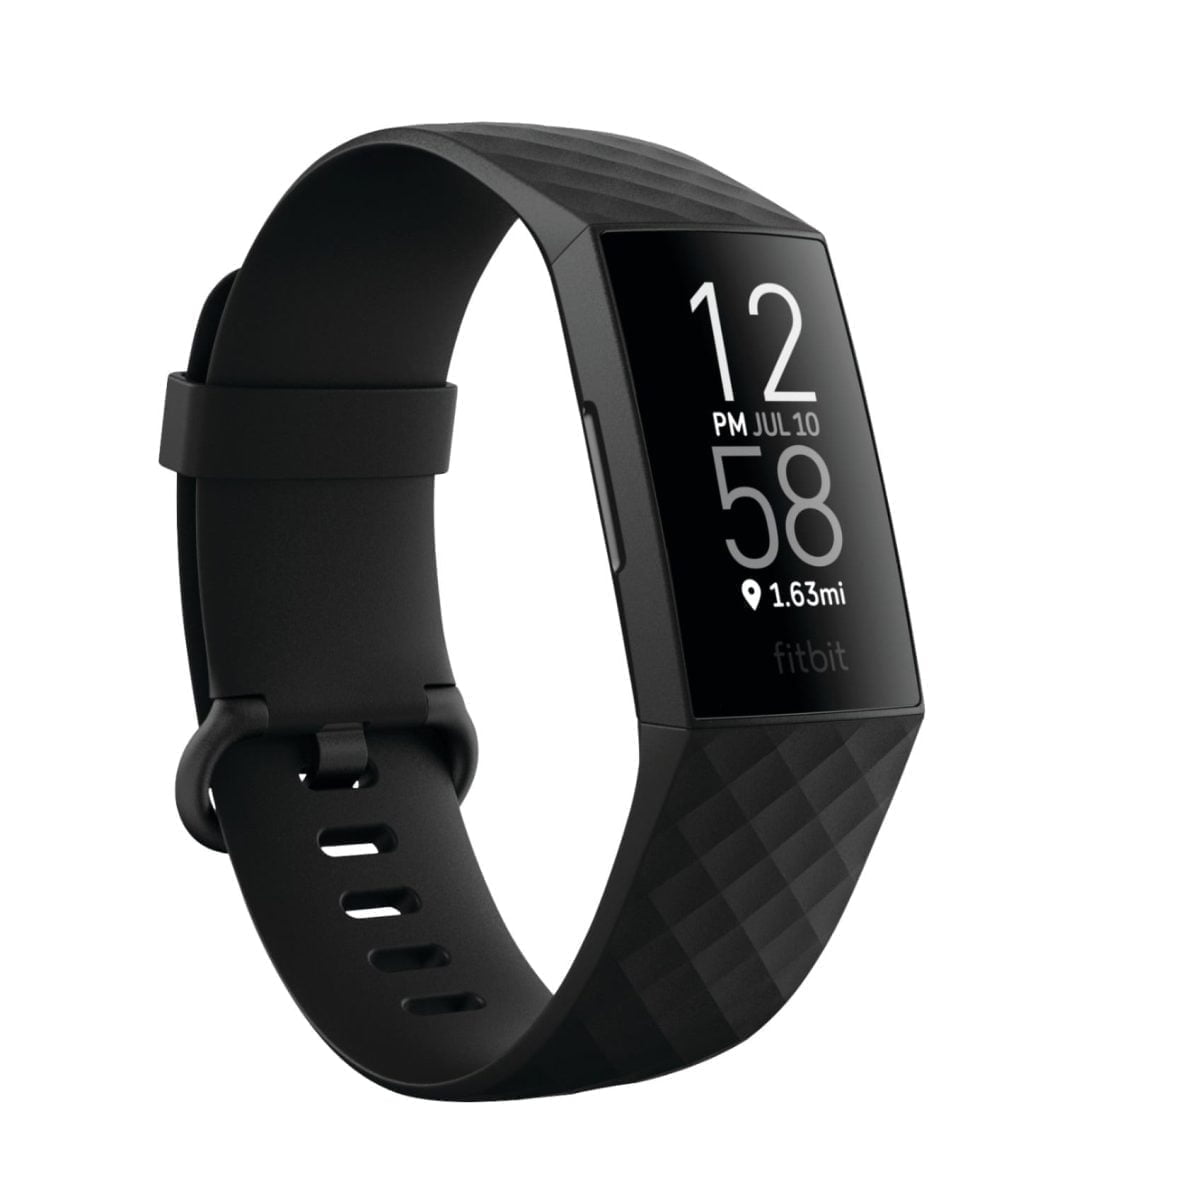 6405752 Rd Fitbit Keep Track Of Time And Listen To Your Favorite Tunes While Exercising With This Black Fitbit Charge 4 Activity Tracker. The Built-In Gps Tracks Your Outdoor Runs, Displaying The Distance Covered, While The Intuitive Touchscreen Delivers Vivid Visuals And Easy Operation. This Fitbit Charge 4 Activity Tracker Has A Rechargeable Battery That Offers Up To 7 Days Of Use, And The Swim-Proof Design Lets You Log Pool Workouts. &Amp;Lt;Ul&Amp;Gt; &Amp;Lt;Li&Amp;Gt;Measures Calories Burned And Heart Rate&Amp;Lt;/Li&Amp;Gt; &Amp;Lt;Li&Amp;Gt;Comprehensive Monitoring&Amp;Lt;/Li&Amp;Gt; &Amp;Lt;Li&Amp;Gt;Sleep Tracking&Amp;Lt;/Li&Amp;Gt; &Amp;Lt;Li&Amp;Gt;Backlit Led Display&Amp;Lt;/Li&Amp;Gt; &Amp;Lt;Li&Amp;Gt;Fitbit Pay&Amp;Lt;/Li&Amp;Gt; &Amp;Lt;Li&Amp;Gt;Active Zone Minutes&Amp;Lt;/Li&Amp;Gt; &Amp;Lt;Li&Amp;Gt;Built-In Gps&Amp;Lt;/Li&Amp;Gt; &Amp;Lt;Li&Amp;Gt;Water-Resistant Design&Amp;Lt;/Li&Amp;Gt; &Amp;Lt;Li&Amp;Gt;Syncs To Select Apple® And Android Devices&Amp;Lt;/Li&Amp;Gt; &Amp;Lt;Li&Amp;Gt;Rechargeable Battery&Amp;Lt;/Li&Amp;Gt; &Amp;Lt;/Ul&Amp;Gt; Fitbit - Charge 4 Activity Tracker Gps + Heart Rate - Black